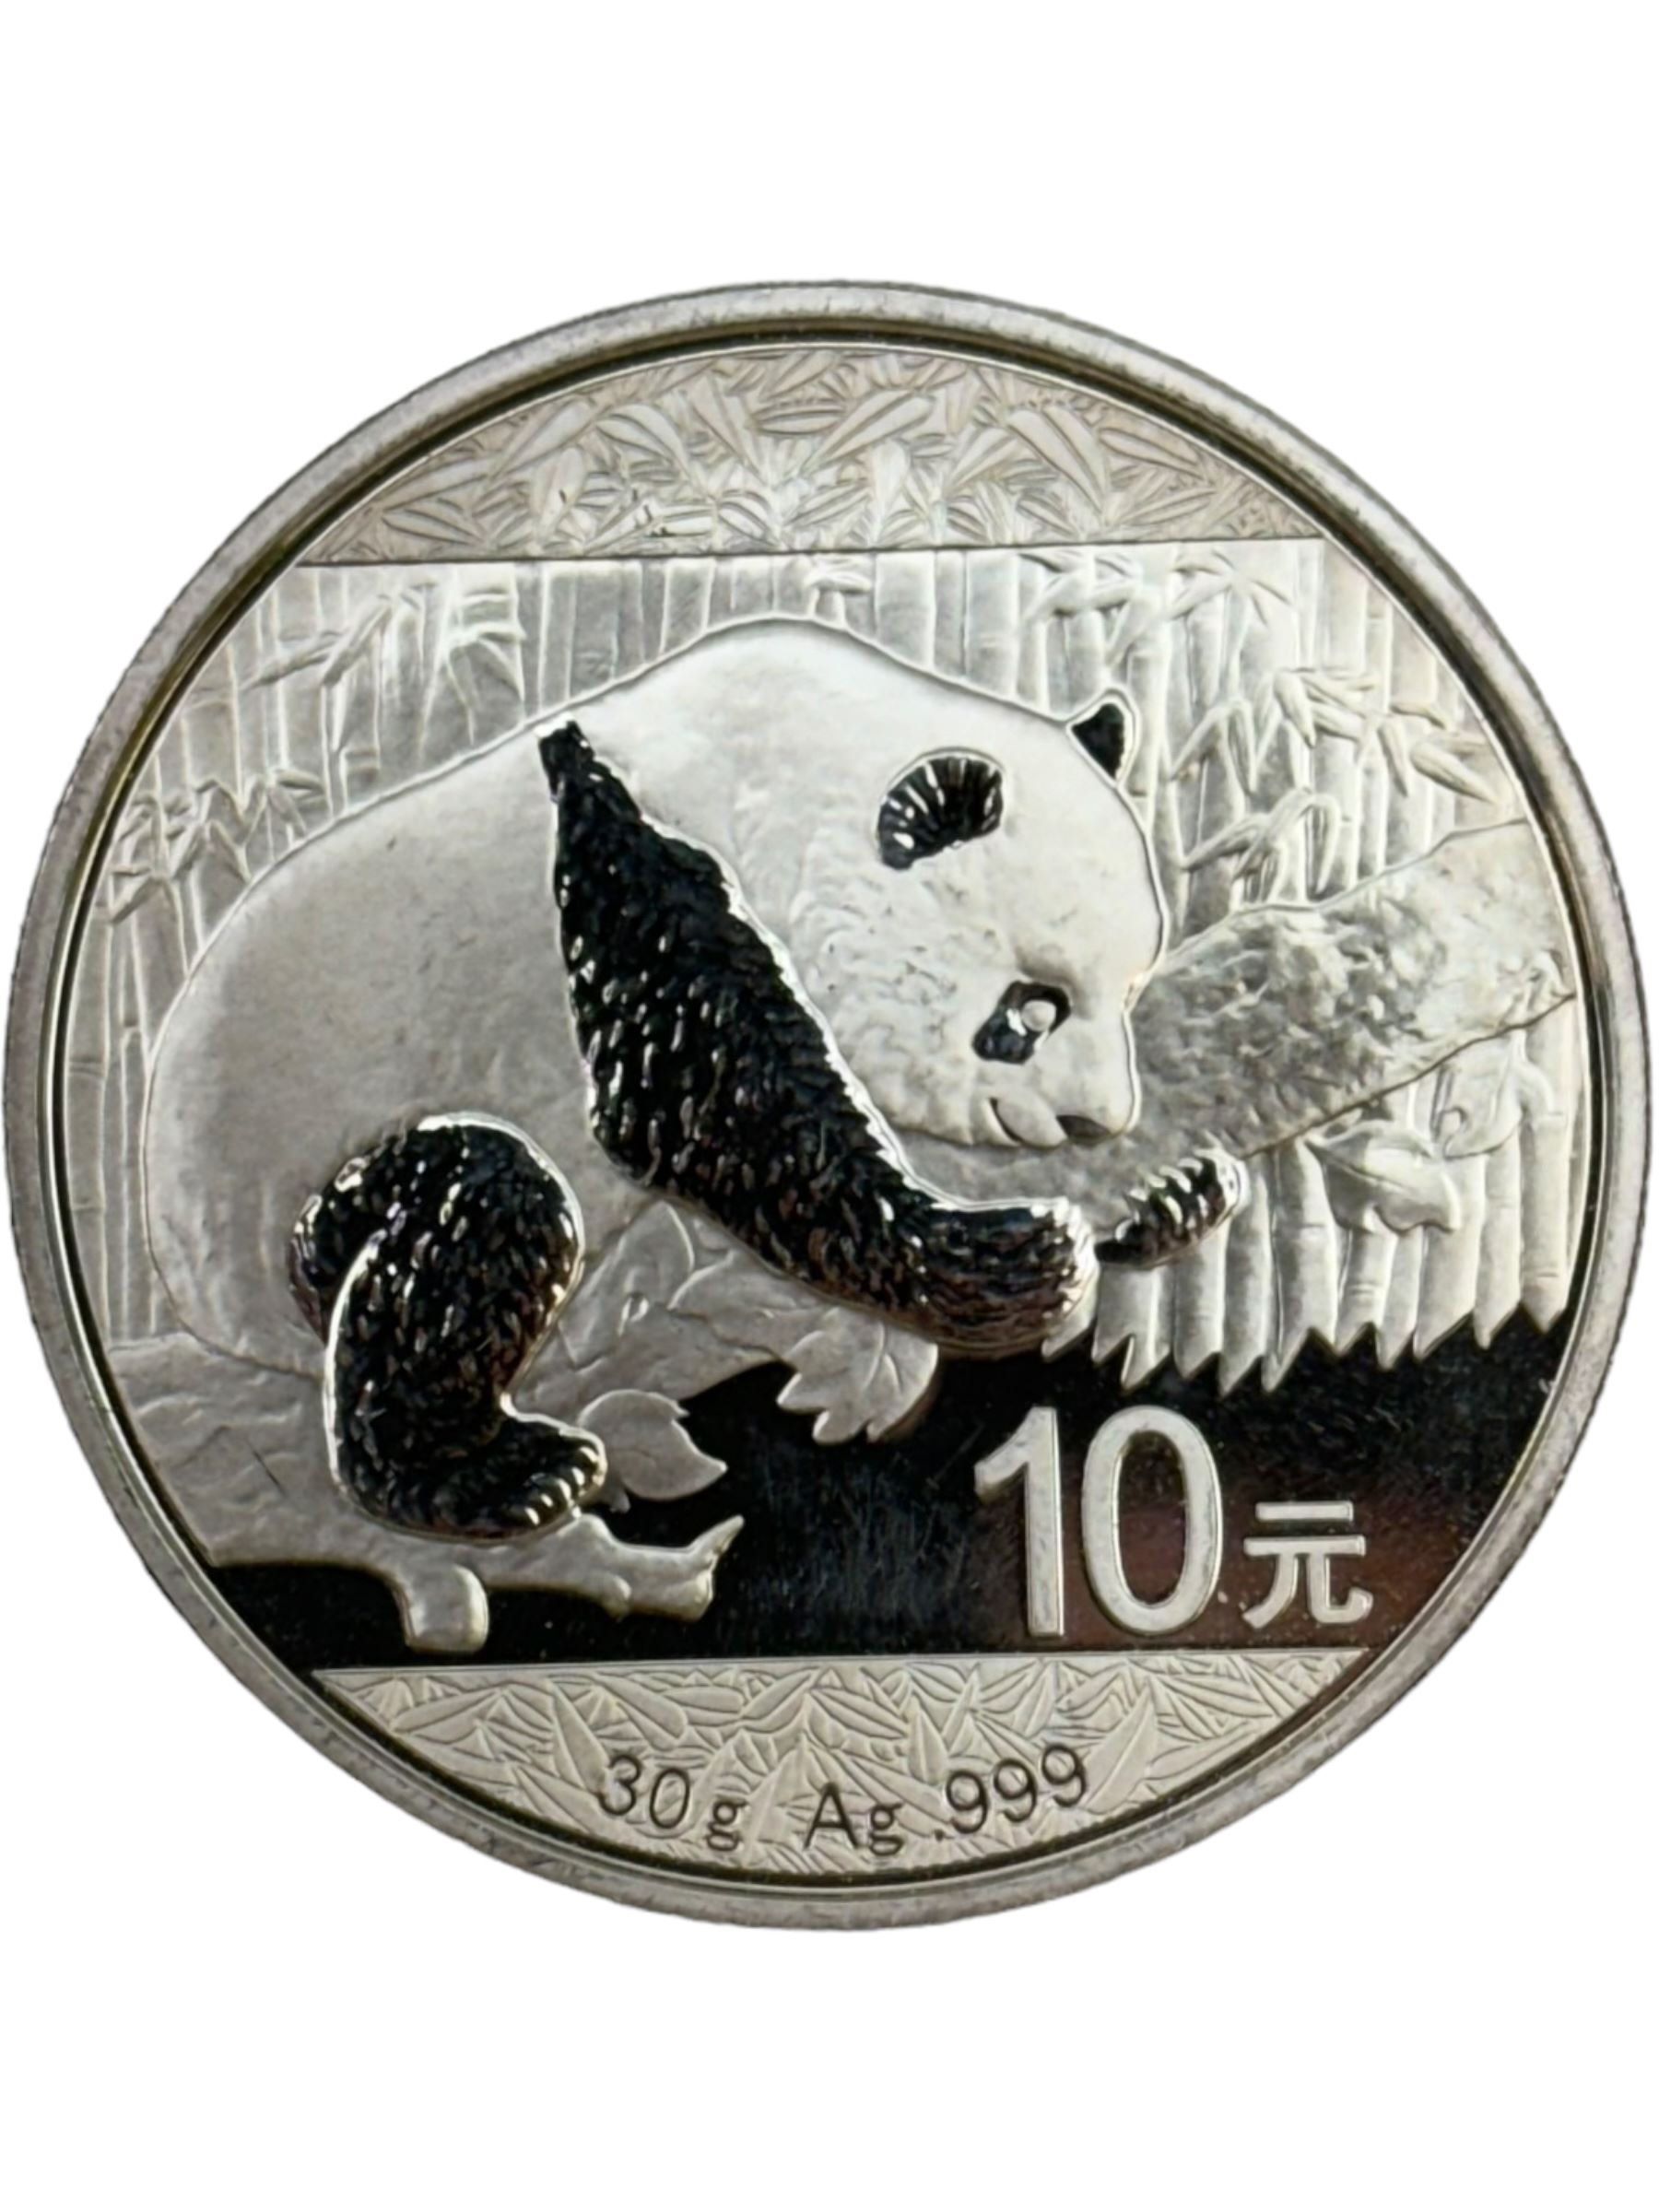 Five China 30g fine silver Panda coins - Image 4 of 7